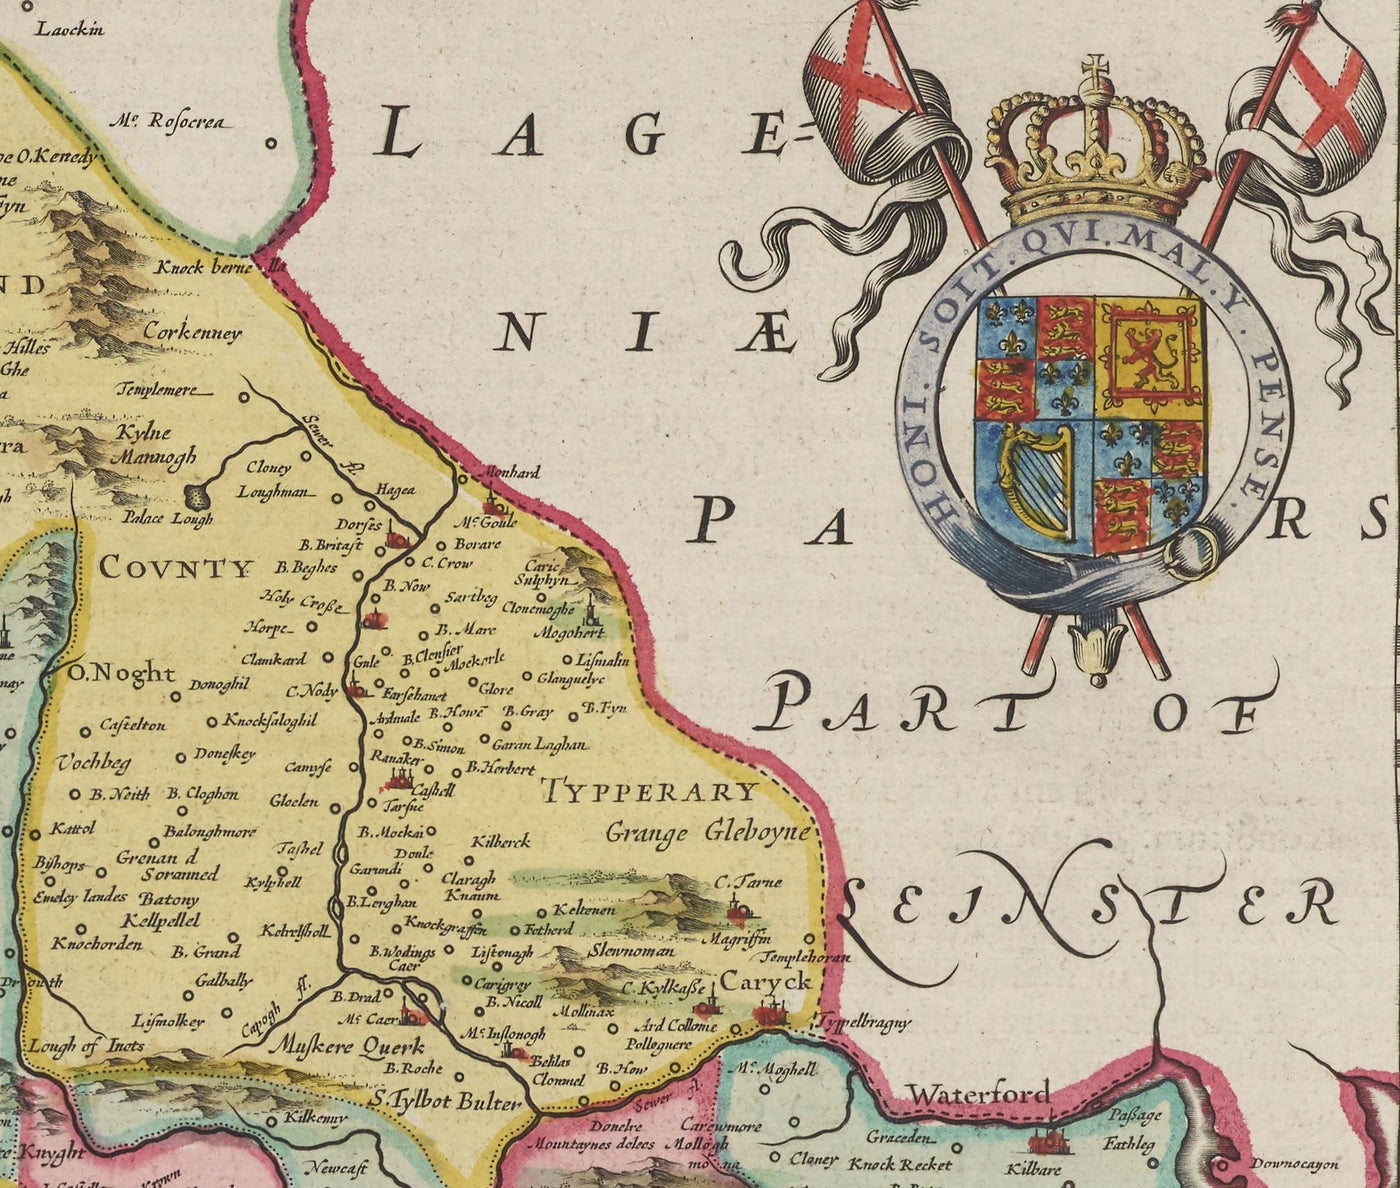 Old Map of Munster, Ireland in 1665 by Joan Blaeu - County Cork, Clare, Kerry, Limerick, Tipperary, Southwest Eire